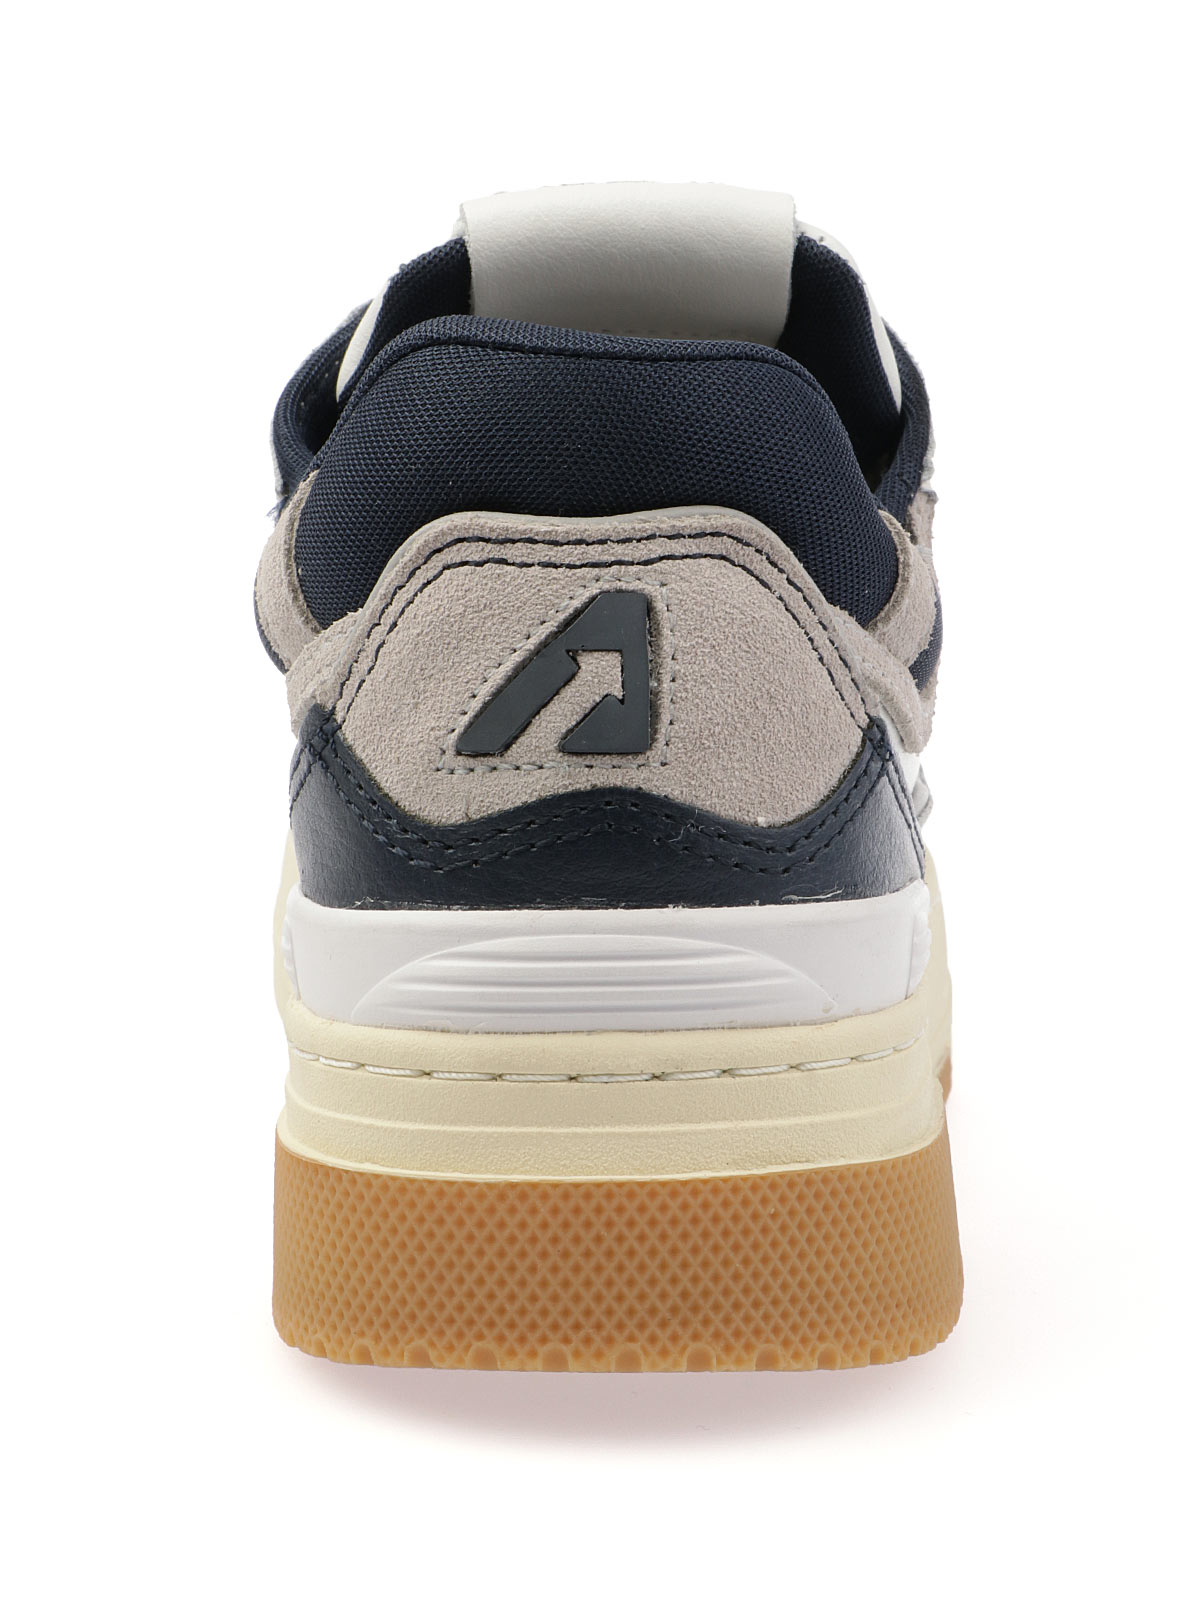 Picture of AUTRY | Women's CLC Low Leather Sneakers